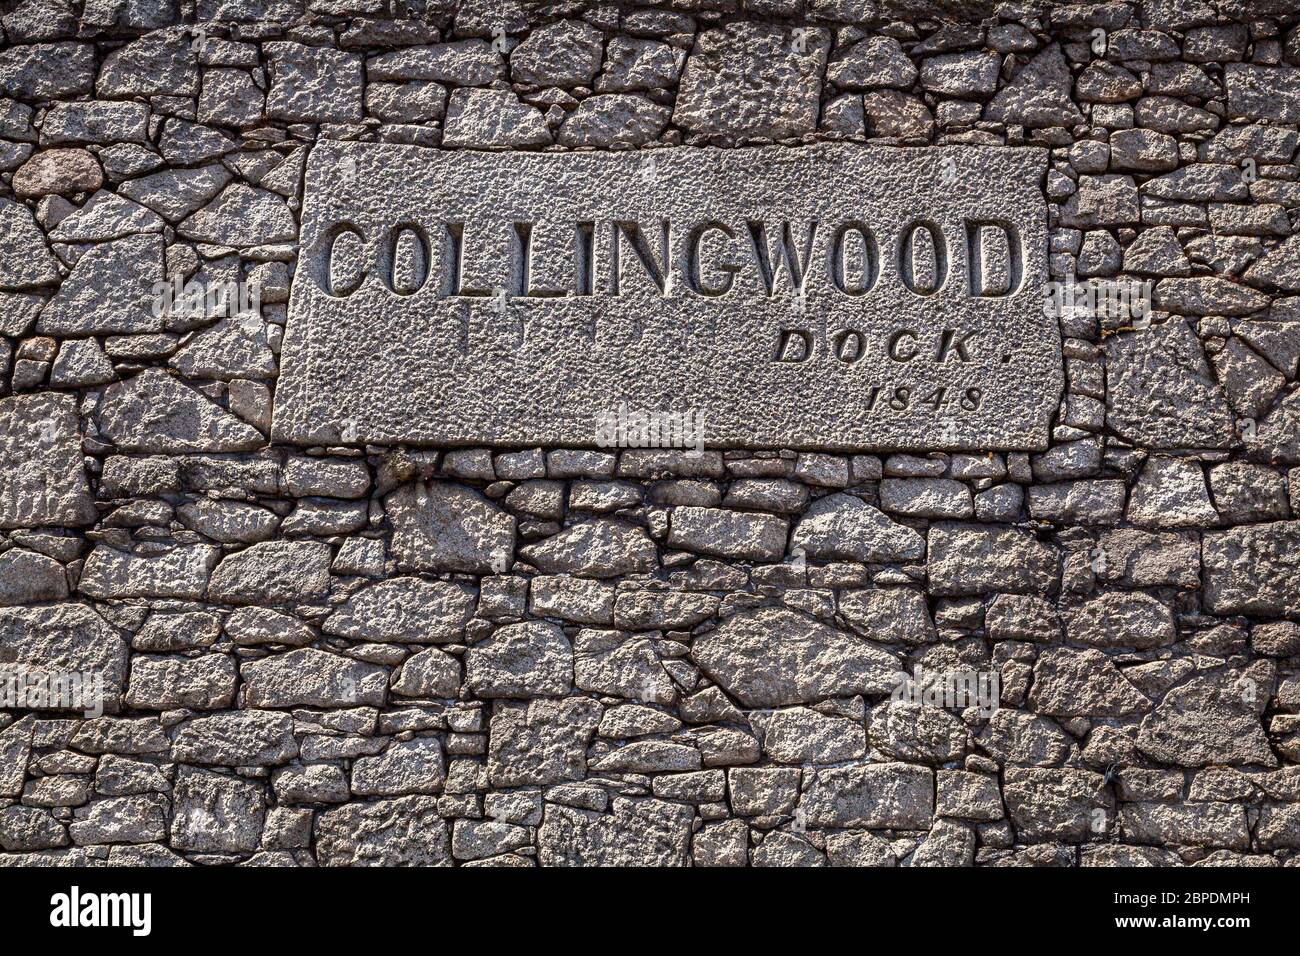 Sign on the old stone wall of the Collingwood Dock, part of the Port of Liverpool, England Stock Photo